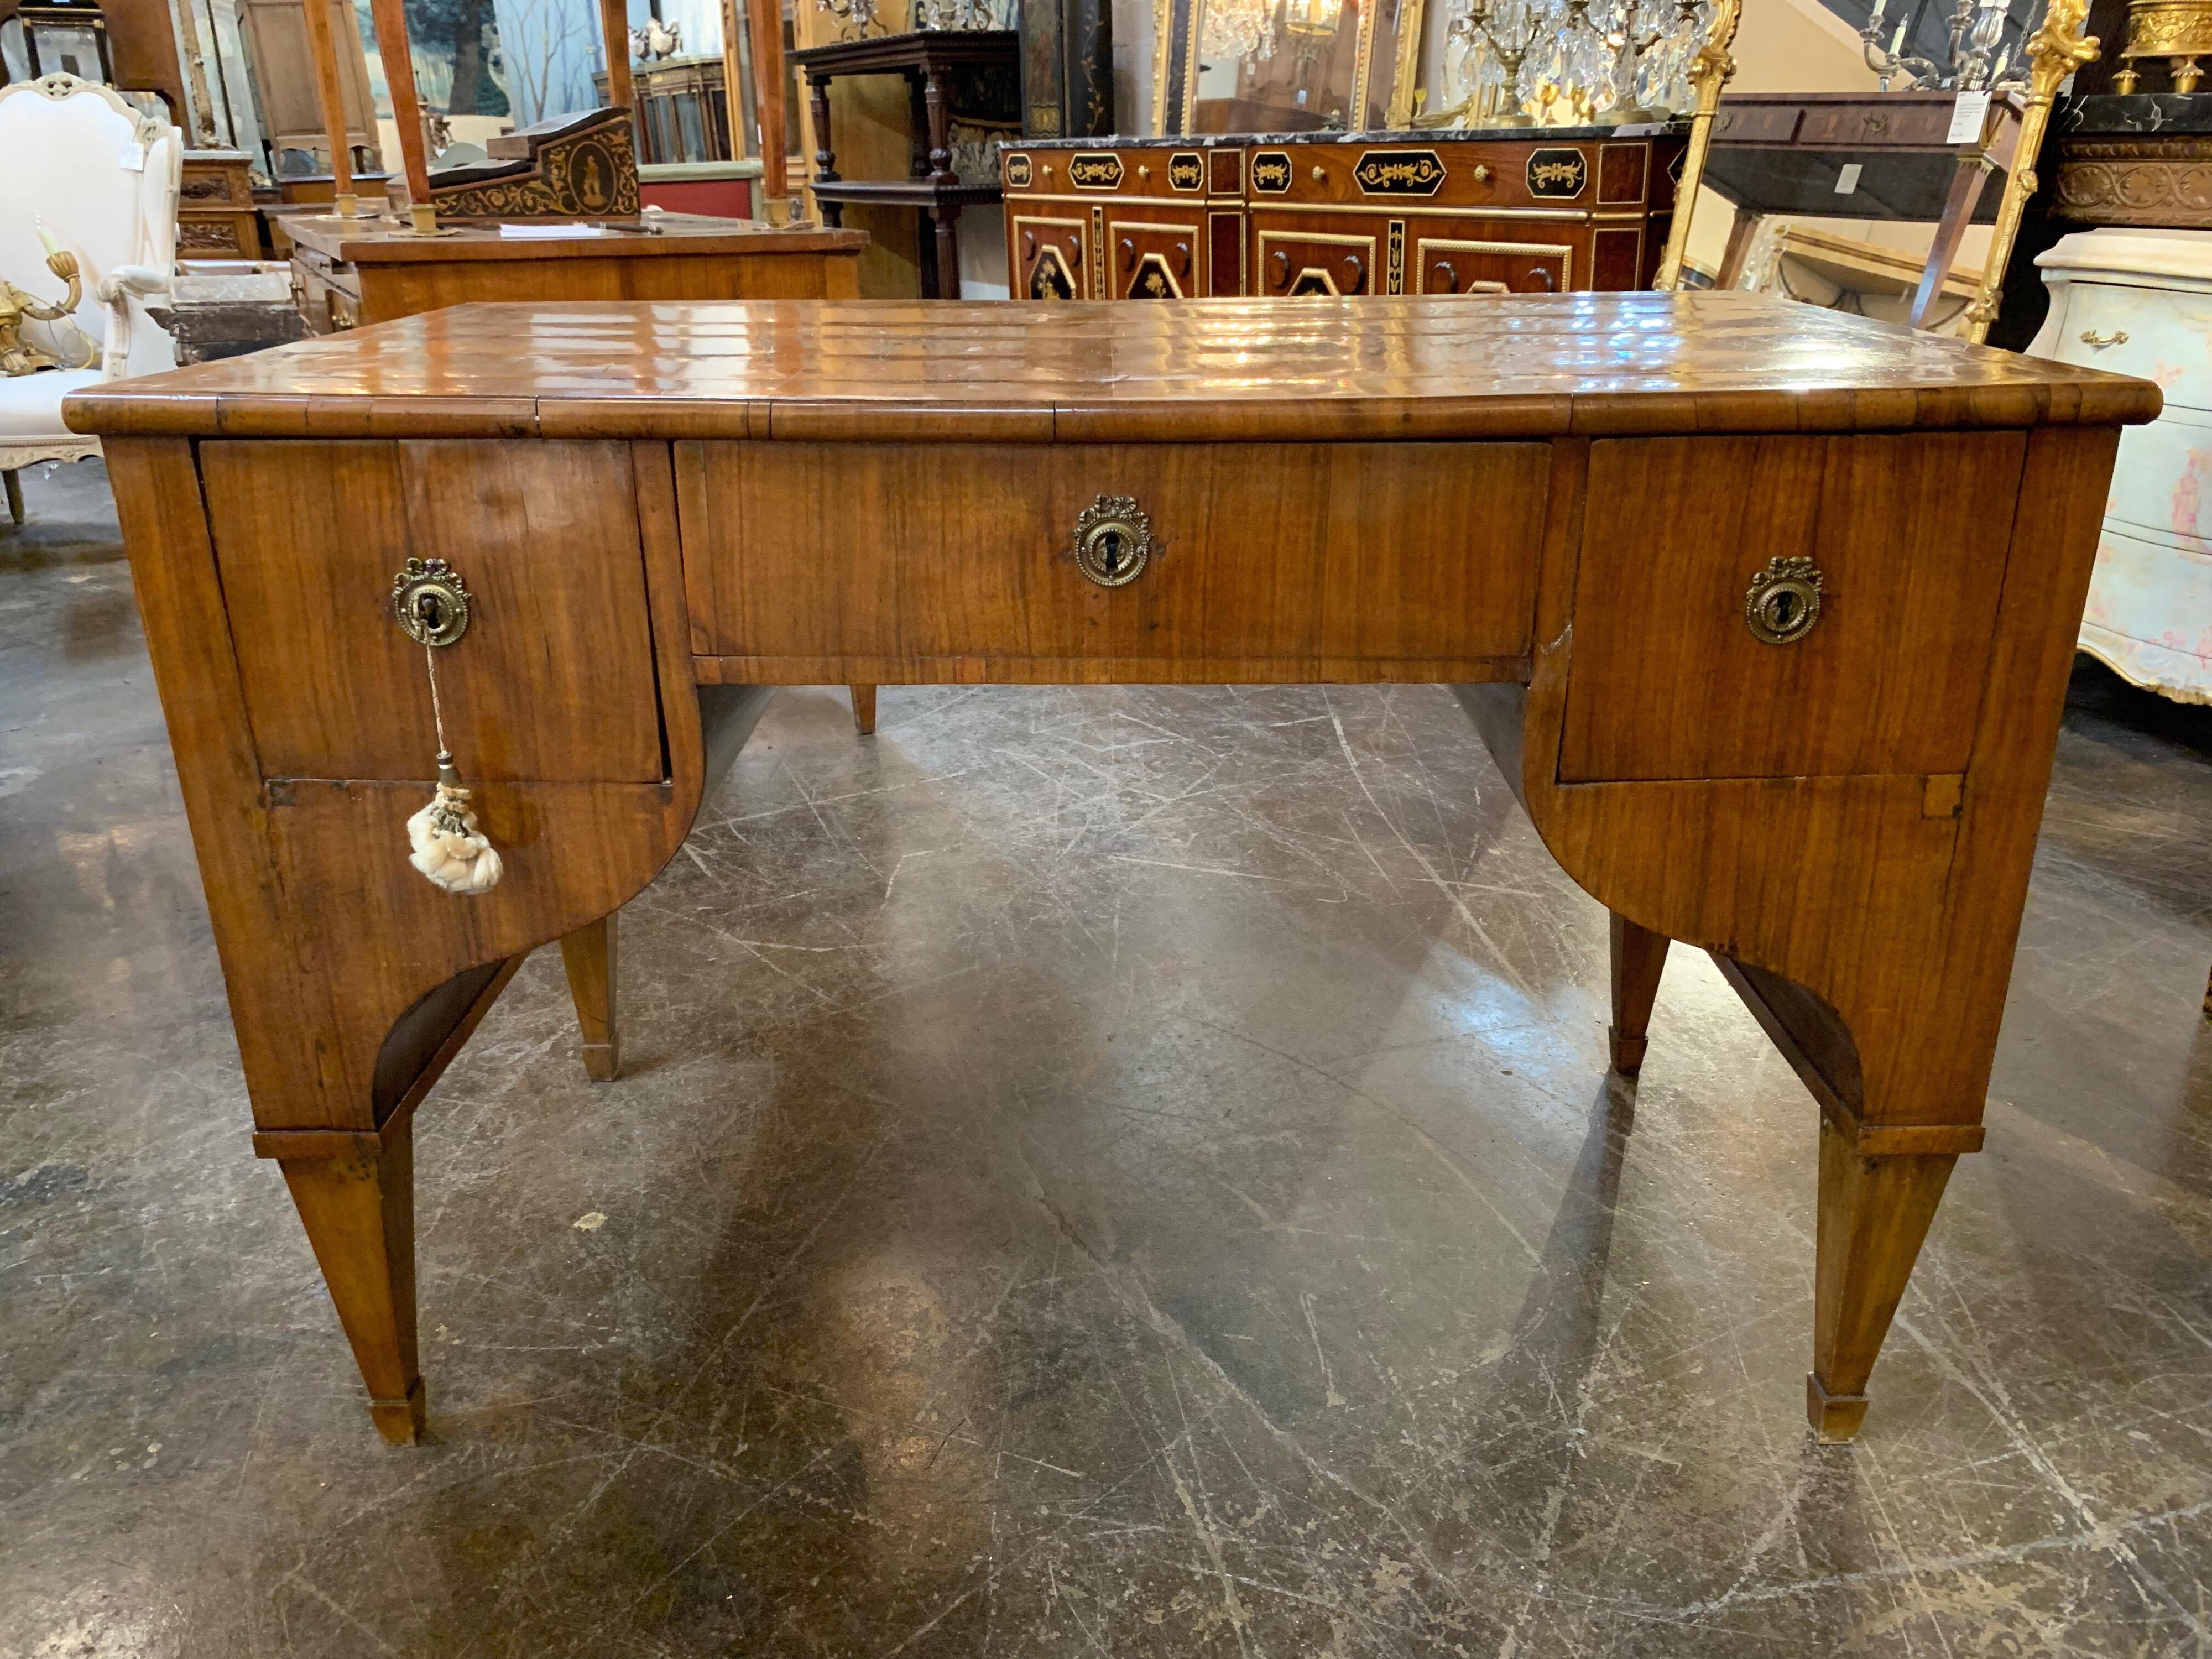 Very handsome mahogany writing desk in the Classic Biedermeier style. Beautiful wood grain and nice storage as well. Perfect for a study or library.